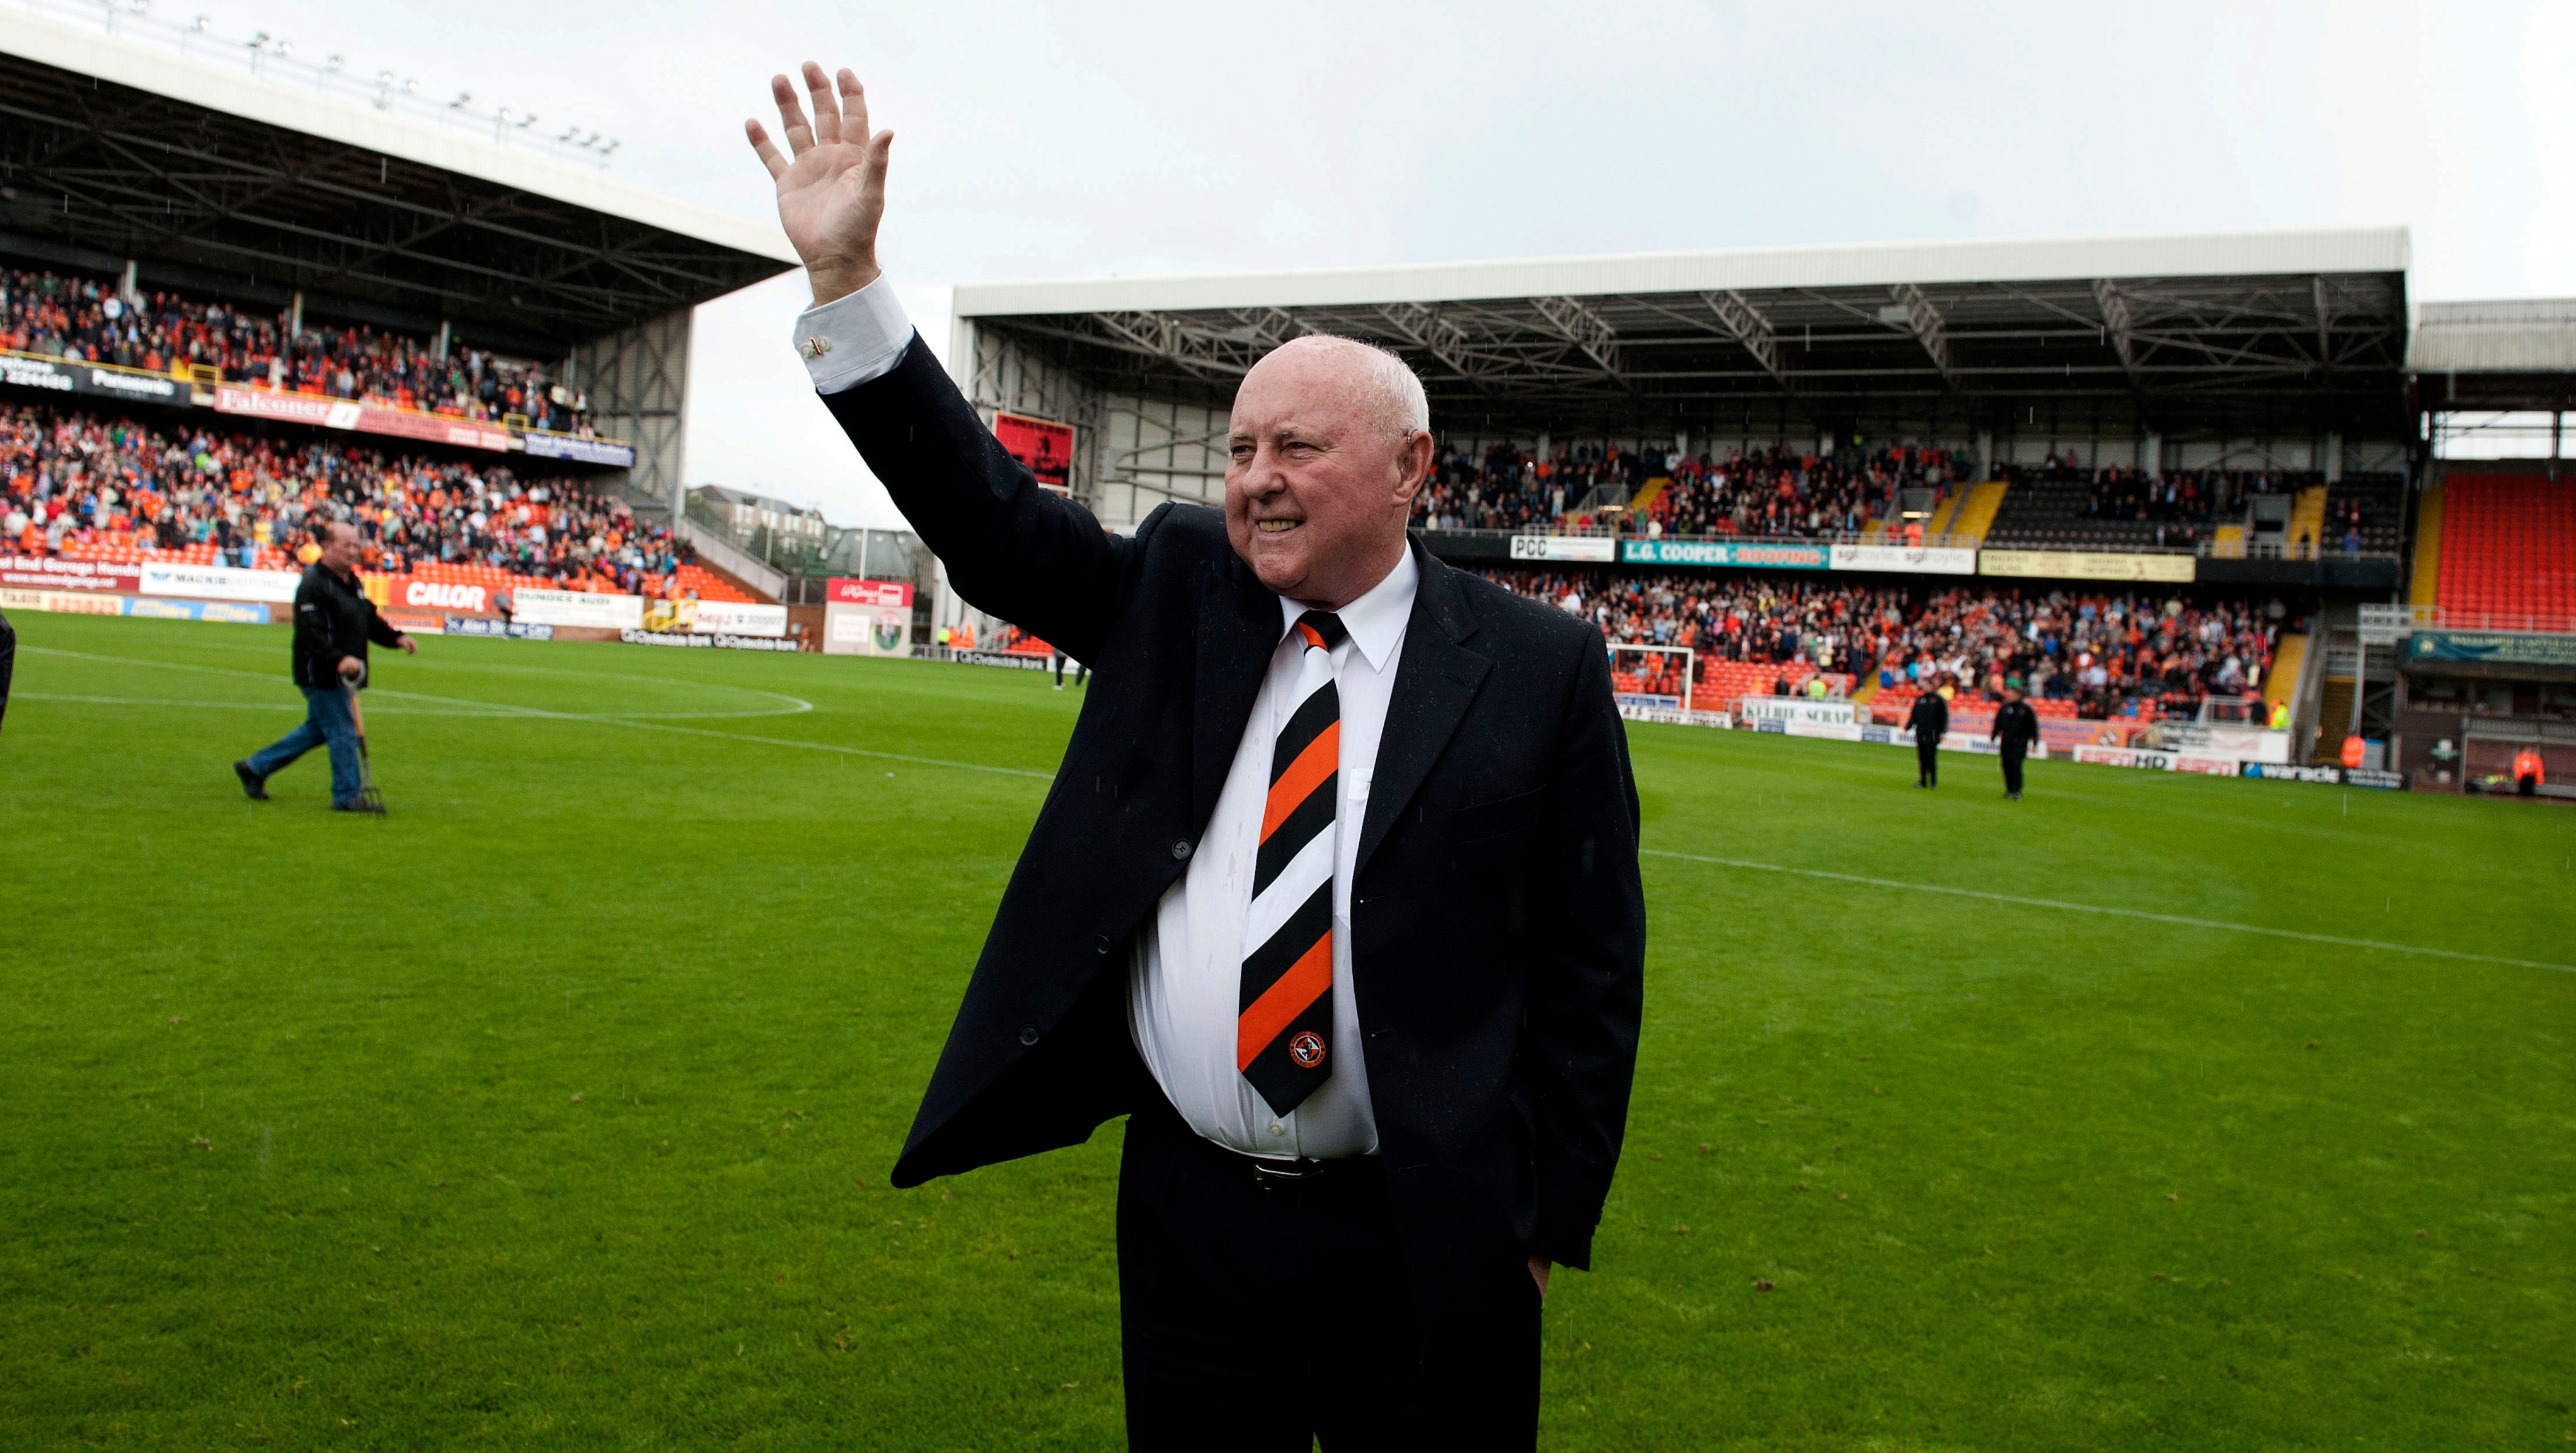 Maurice Malpas said what Jim McLean achieved 'will never be done again'.